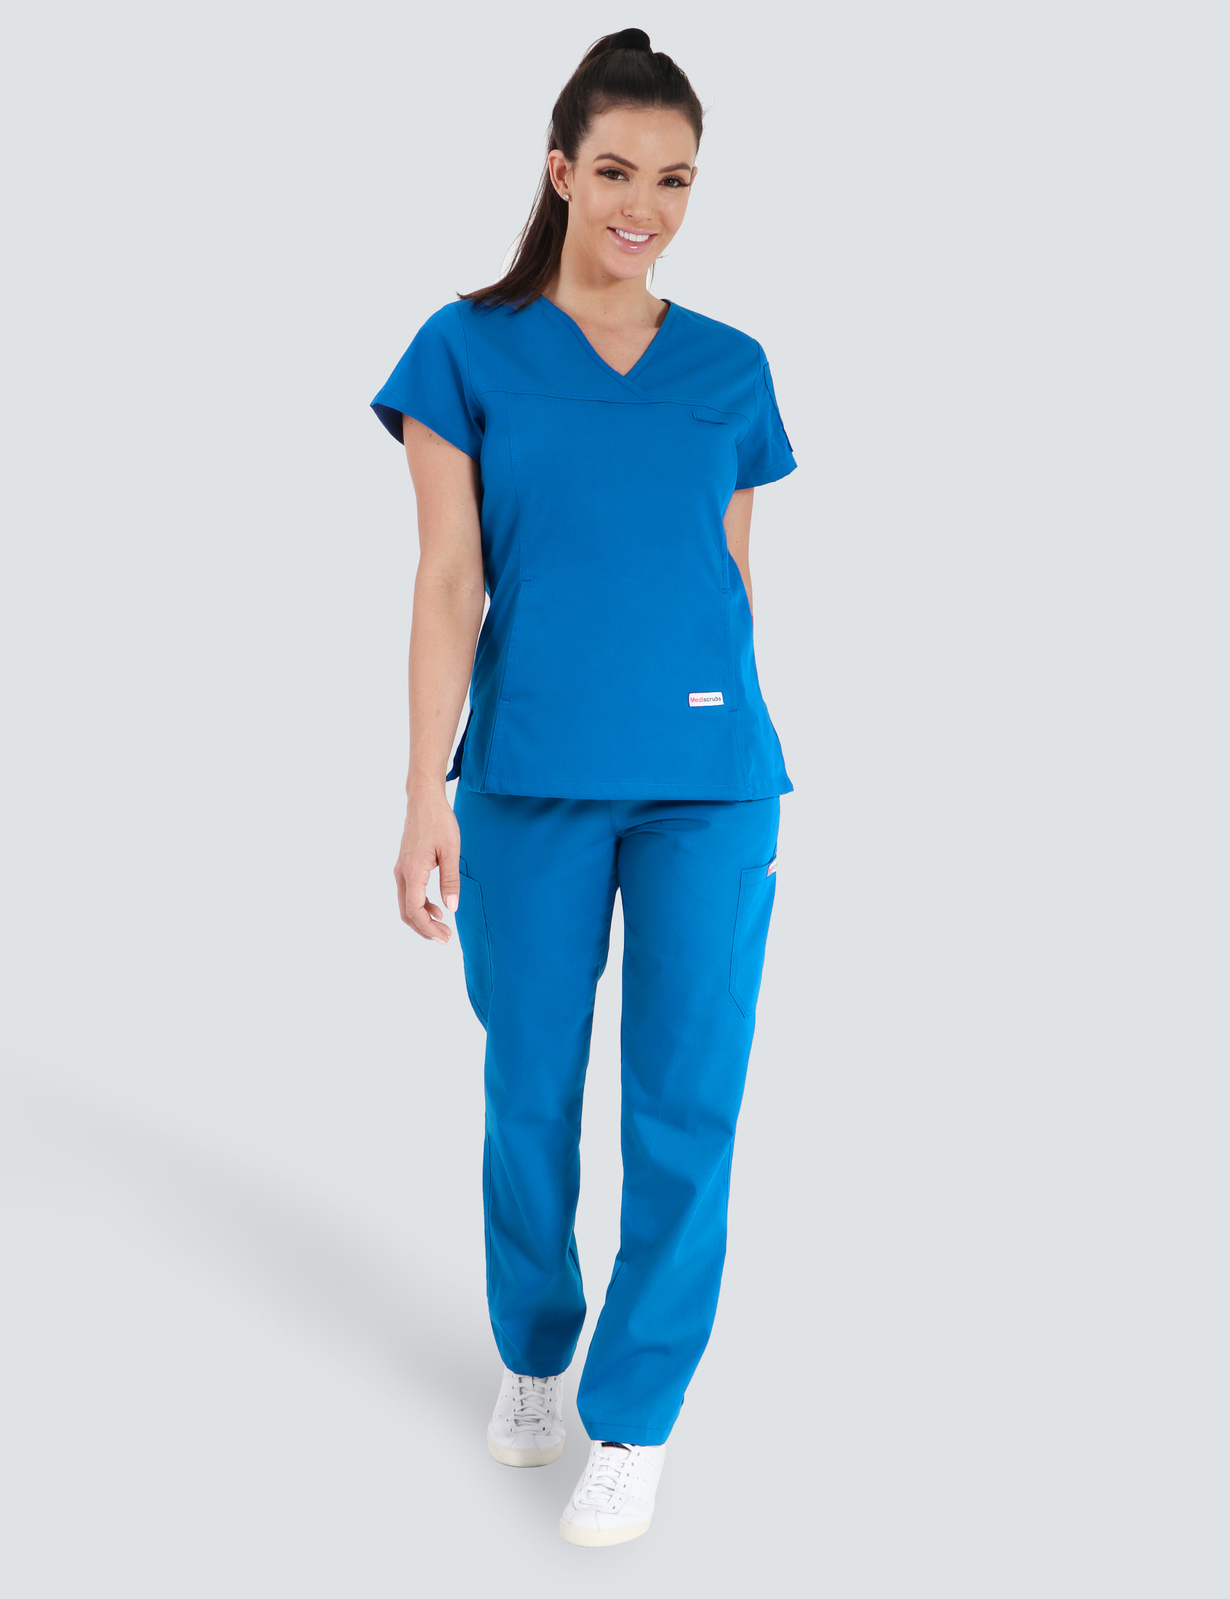 Canberra Hospital - Cardiology Cardiac Physiologist (Women's Fit Solid Scrub Top and Cargo Pants in Royal incl Logos)